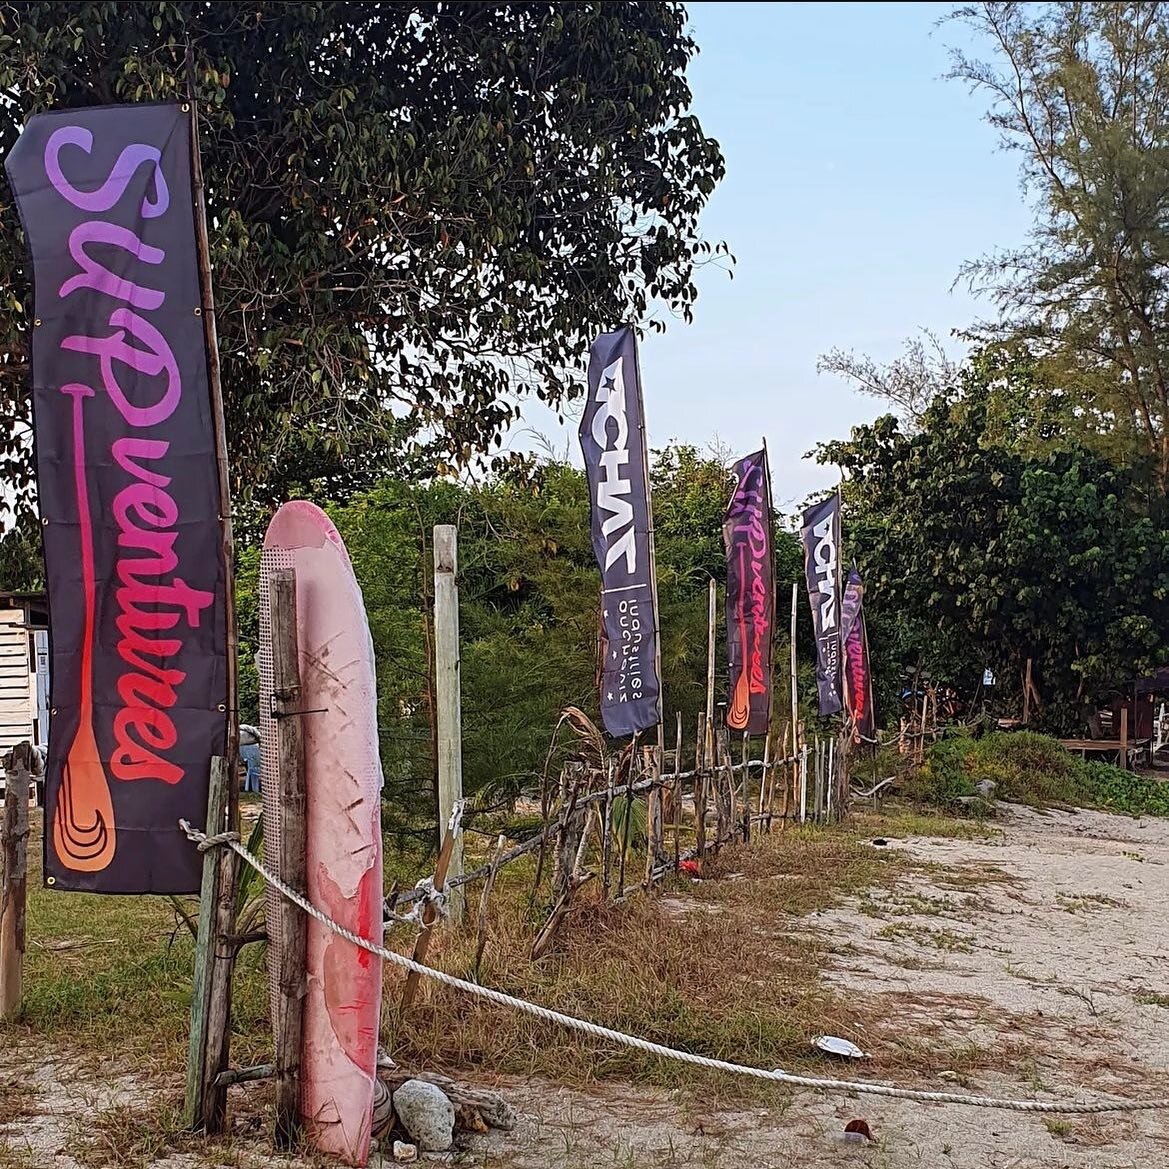 We&rsquo;re all set and ready for monsoon szn in Desaru with our bruddahs @anchoviz_industries! 
Can&rsquo;t wait to catch the stoke &amp; rip some with the Surf Ohana! 

#surfstoke #surfszn #monsoon #supventures #supsg #sg #notjustanotherpaddleclub